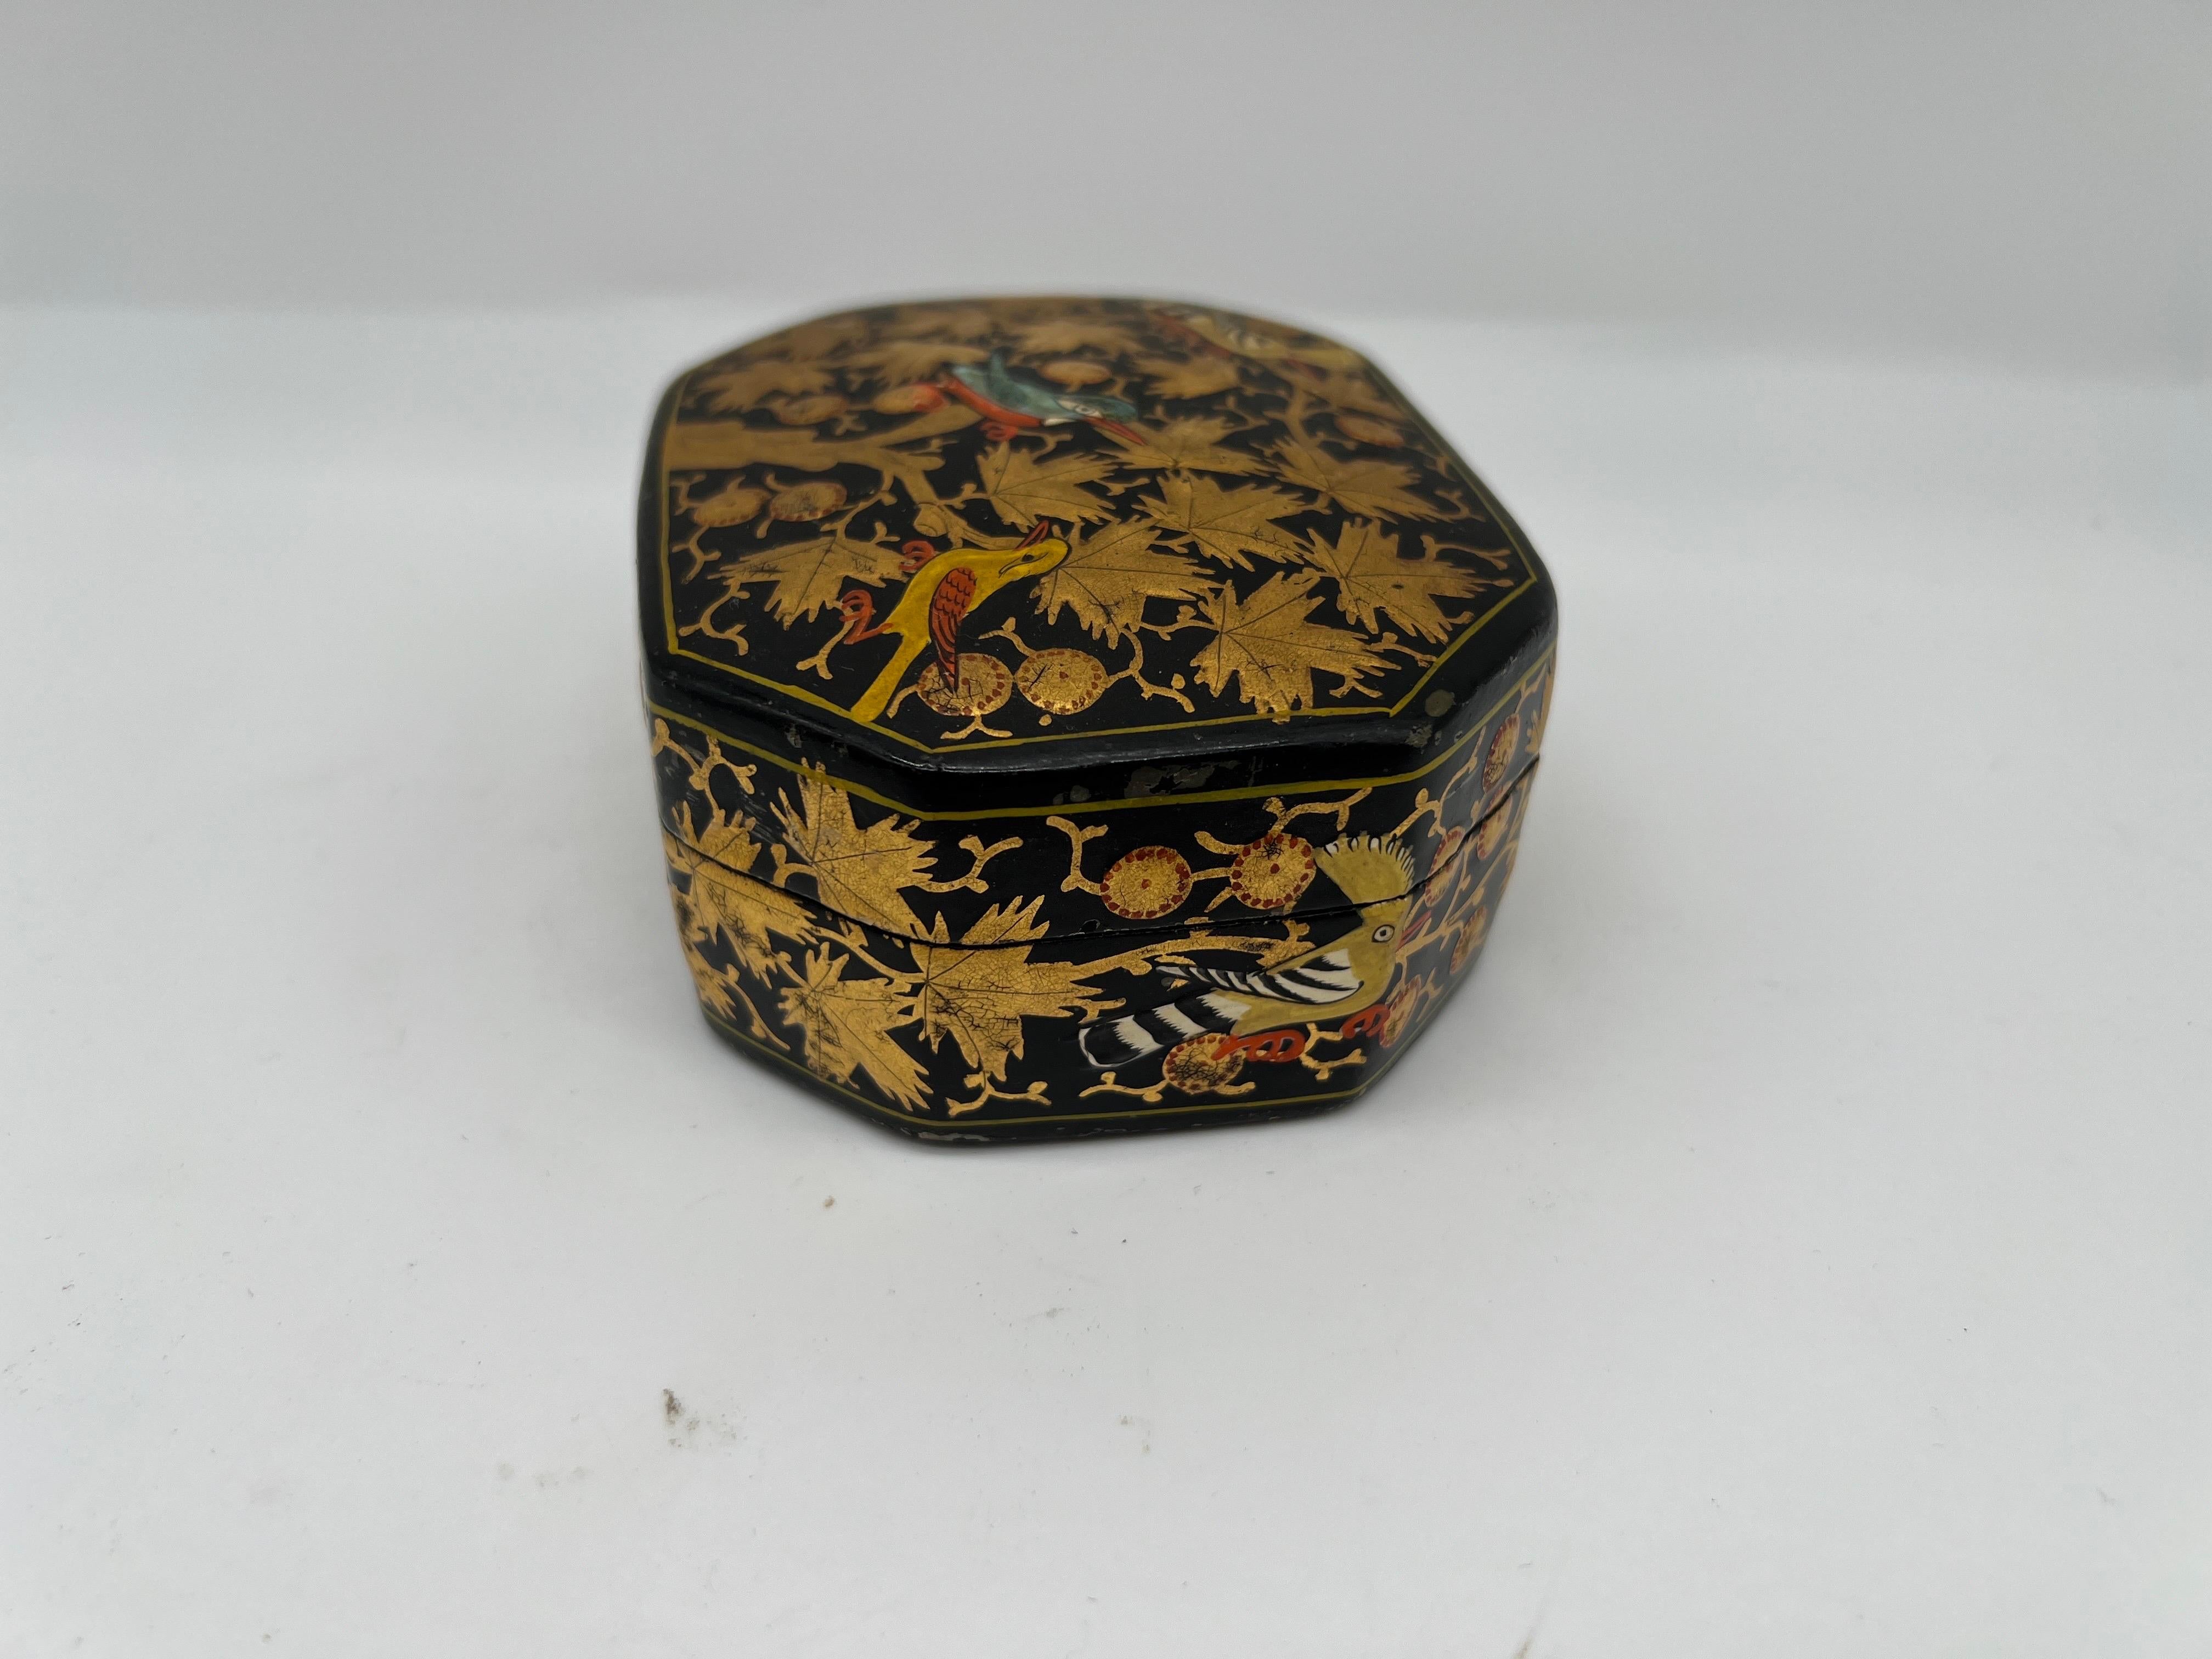 Kashmiri, early 20th century.
An antique black lacquer box with heavy gilt floral decoration and multi colored birds across surface. 